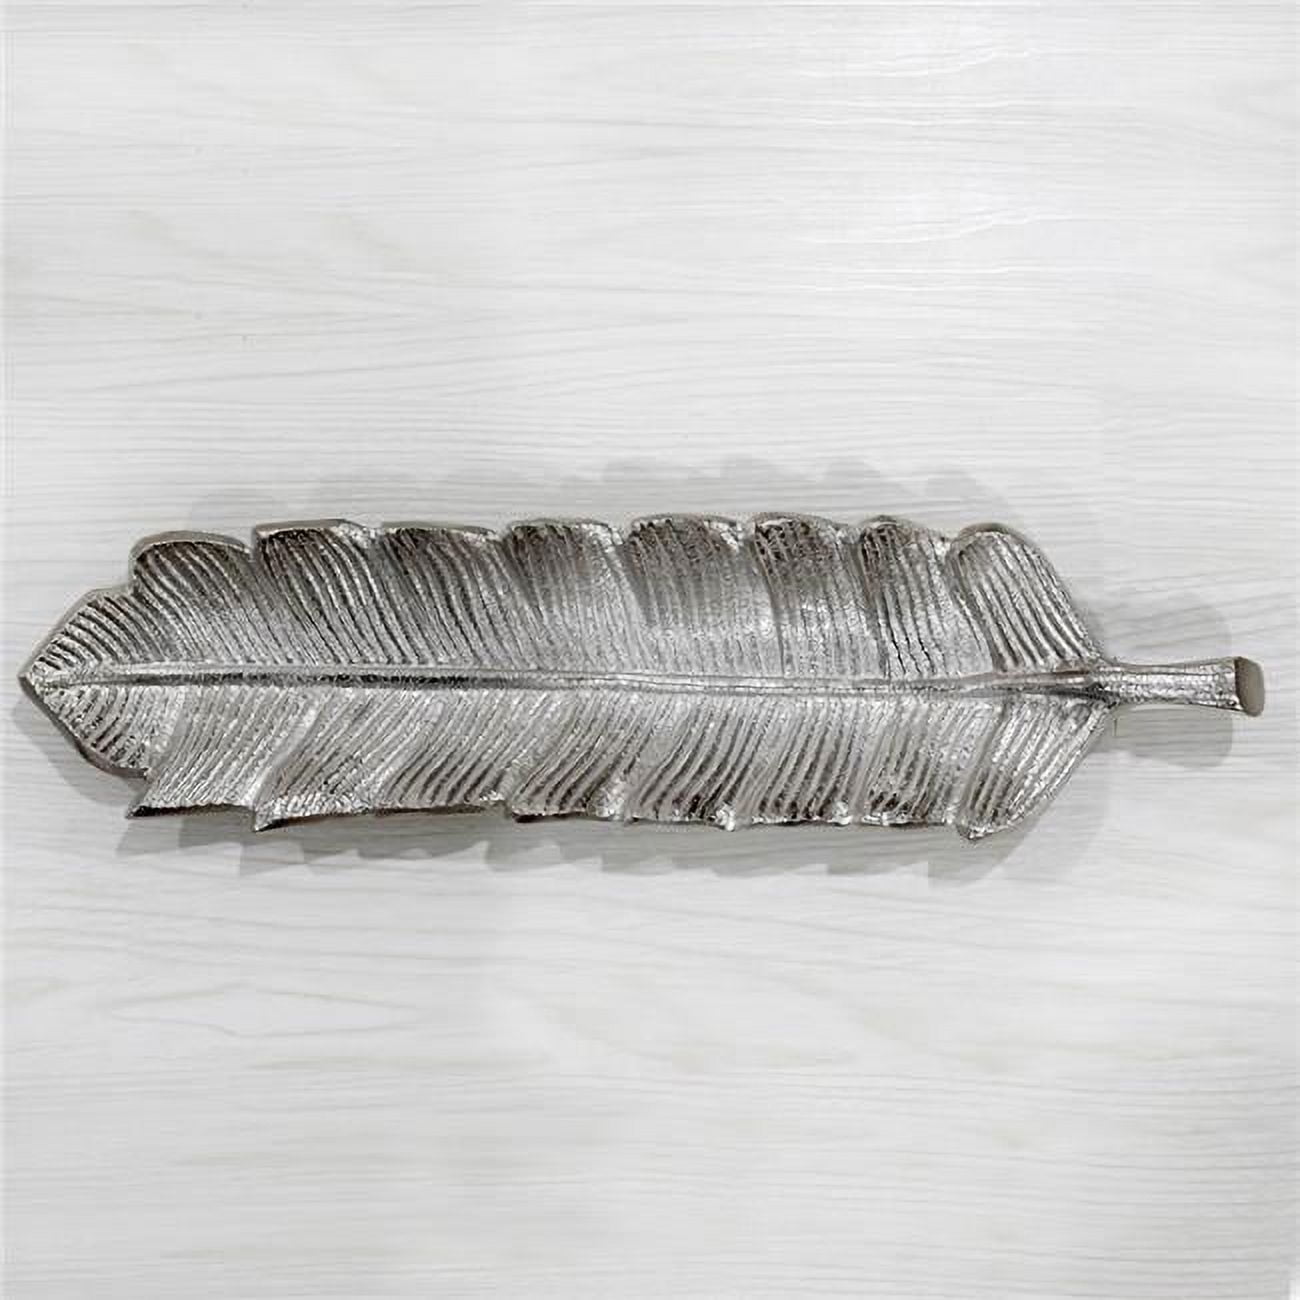 Picture of BBH Homes UBBBVK033AB2020SC1HS 15.78 x 3.74 x 1.18 in. Handmade Silver Coated Decorative Aluminum Tray